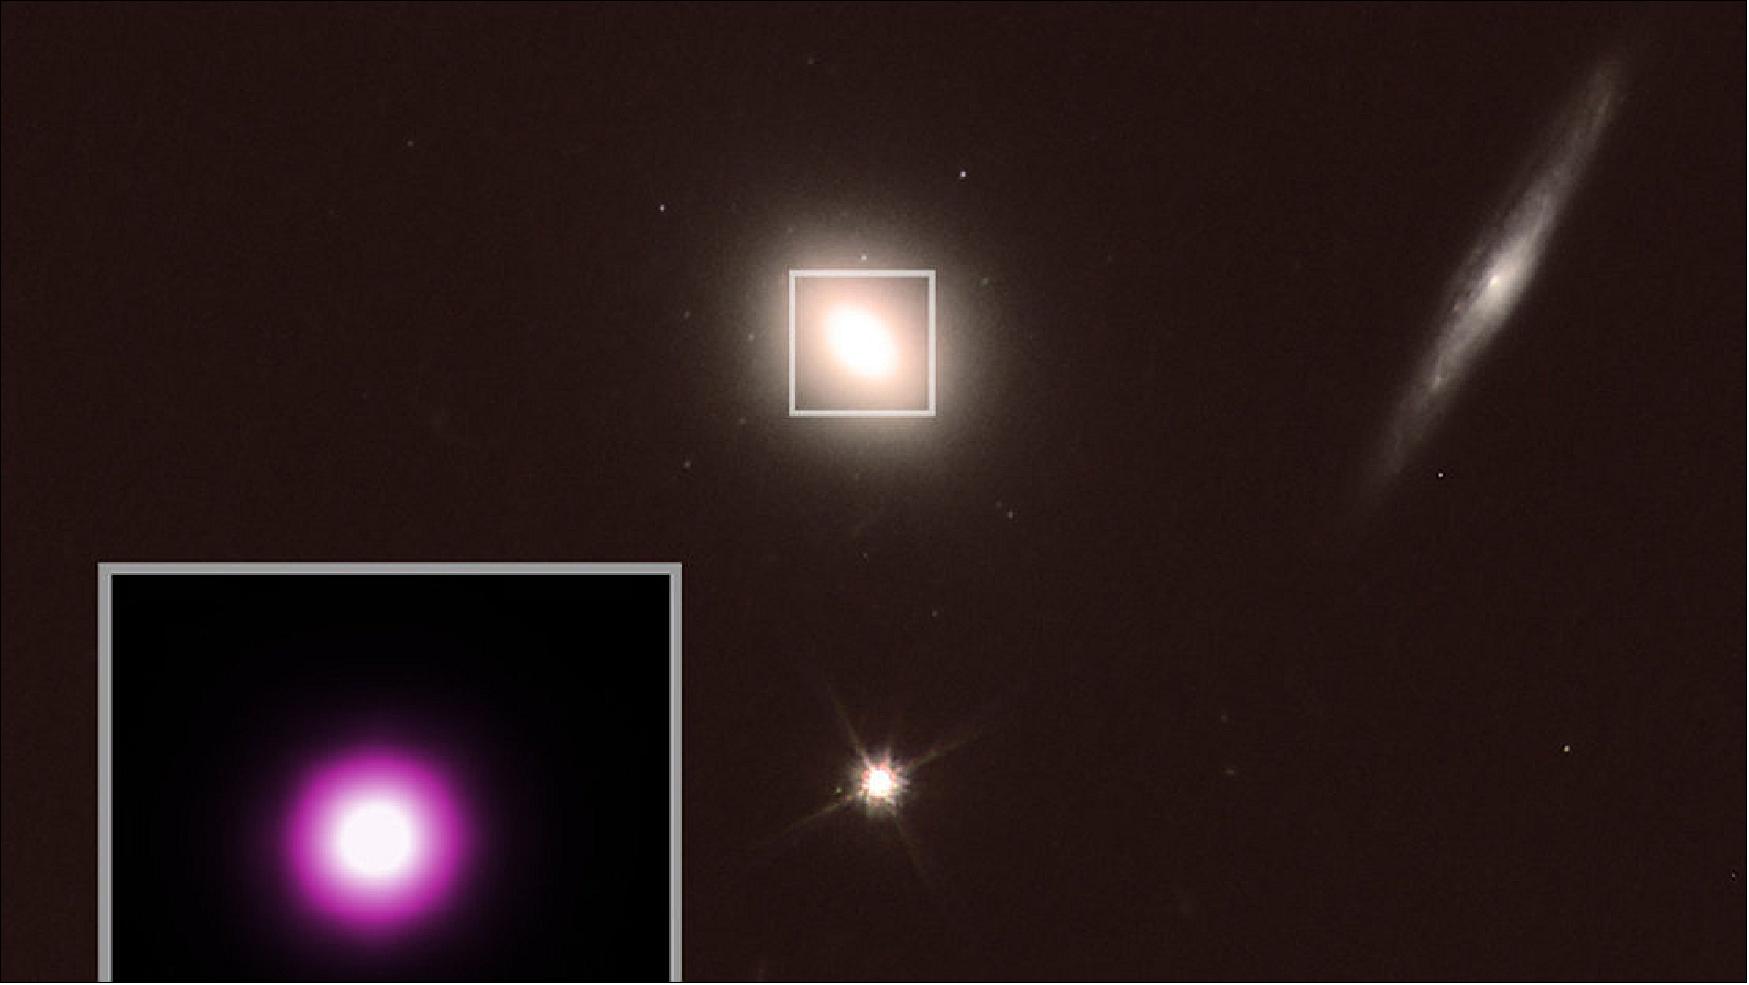 Figure 67: The host galaxy of ASASSN-14li, a black hole devouring a star, as observed by the NASA/ESA Hubble Space Telescope in optical wavelengths. The insert in the lower left shows the X-ray view obtained by NASA’s Chandra observatory. Observations of ASASSN-14li have revealed an exceptionally bright and stable signal that oscillated over a period of 131 seconds for a long time: 450 days. By combining this with information about the black hole’s mass and size, the astronomers found that the hole must be spinning rapidly – at more than 50% of the speed of light – and that the signal came from its innermost regions (image credit: X-ray: NASA/CXC/MIT/D. Pasham et al; Optical: HST/STScI/I. Arcavi)